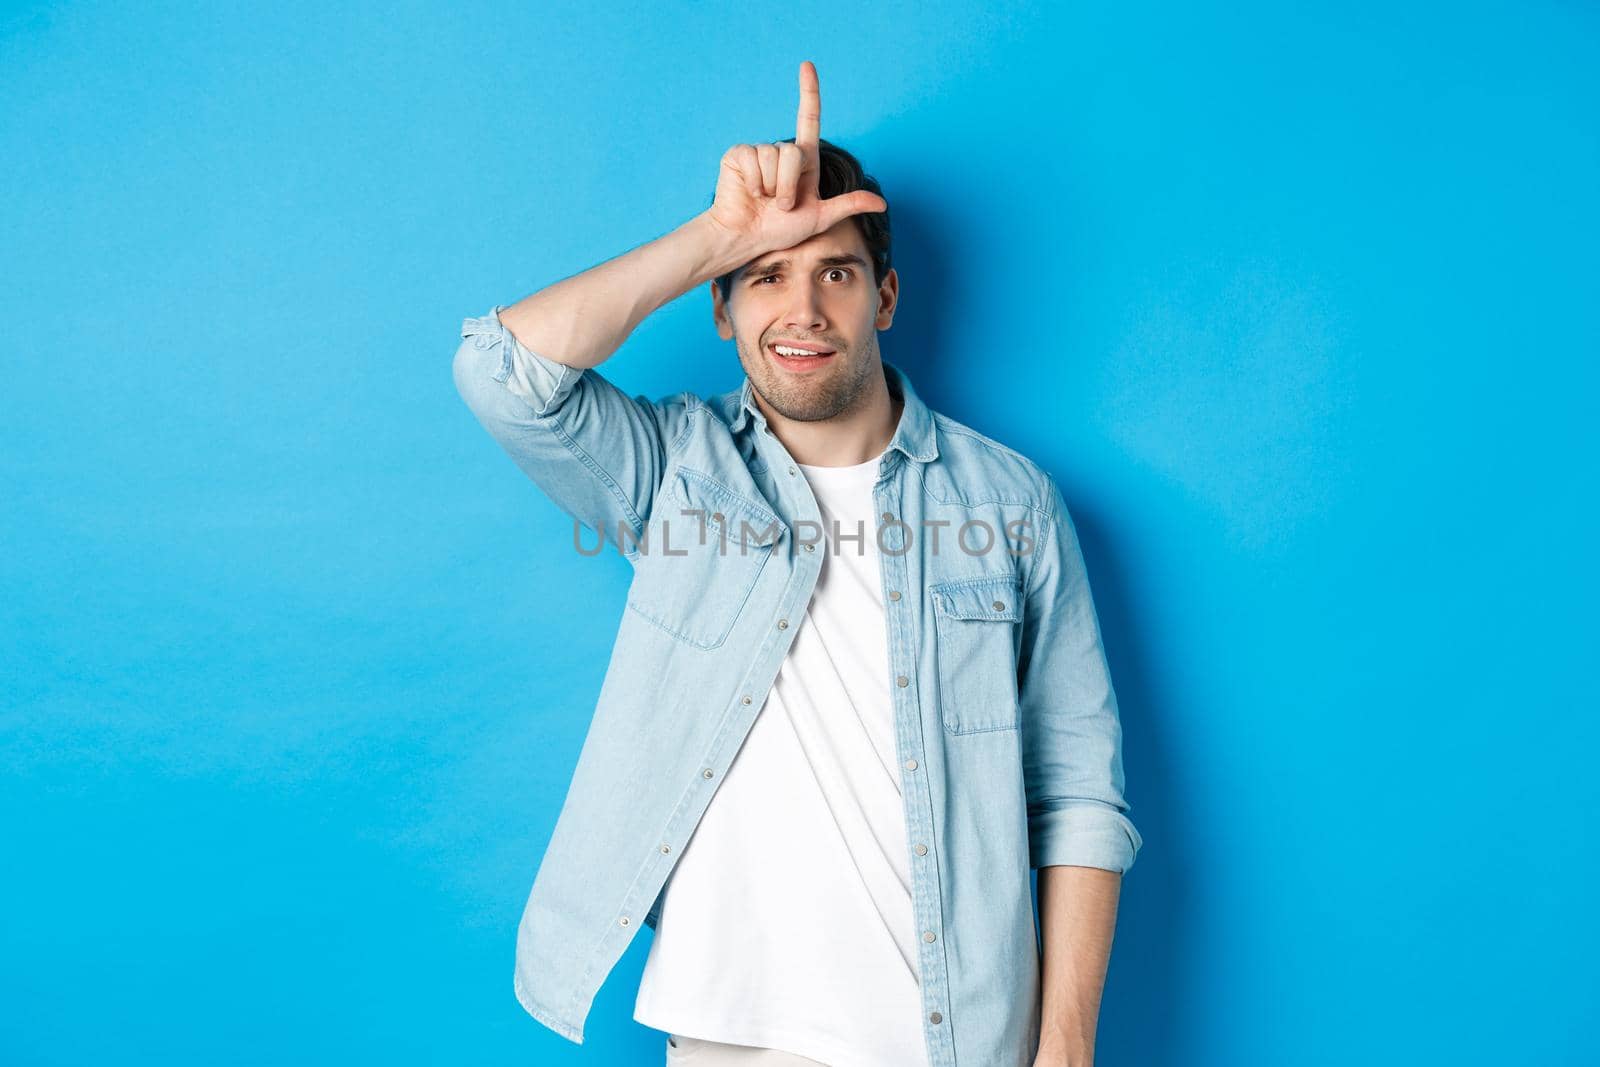 Rude guy mocking person for losing, showing loser sign on forehead and looking with dismay, standing against blue background.